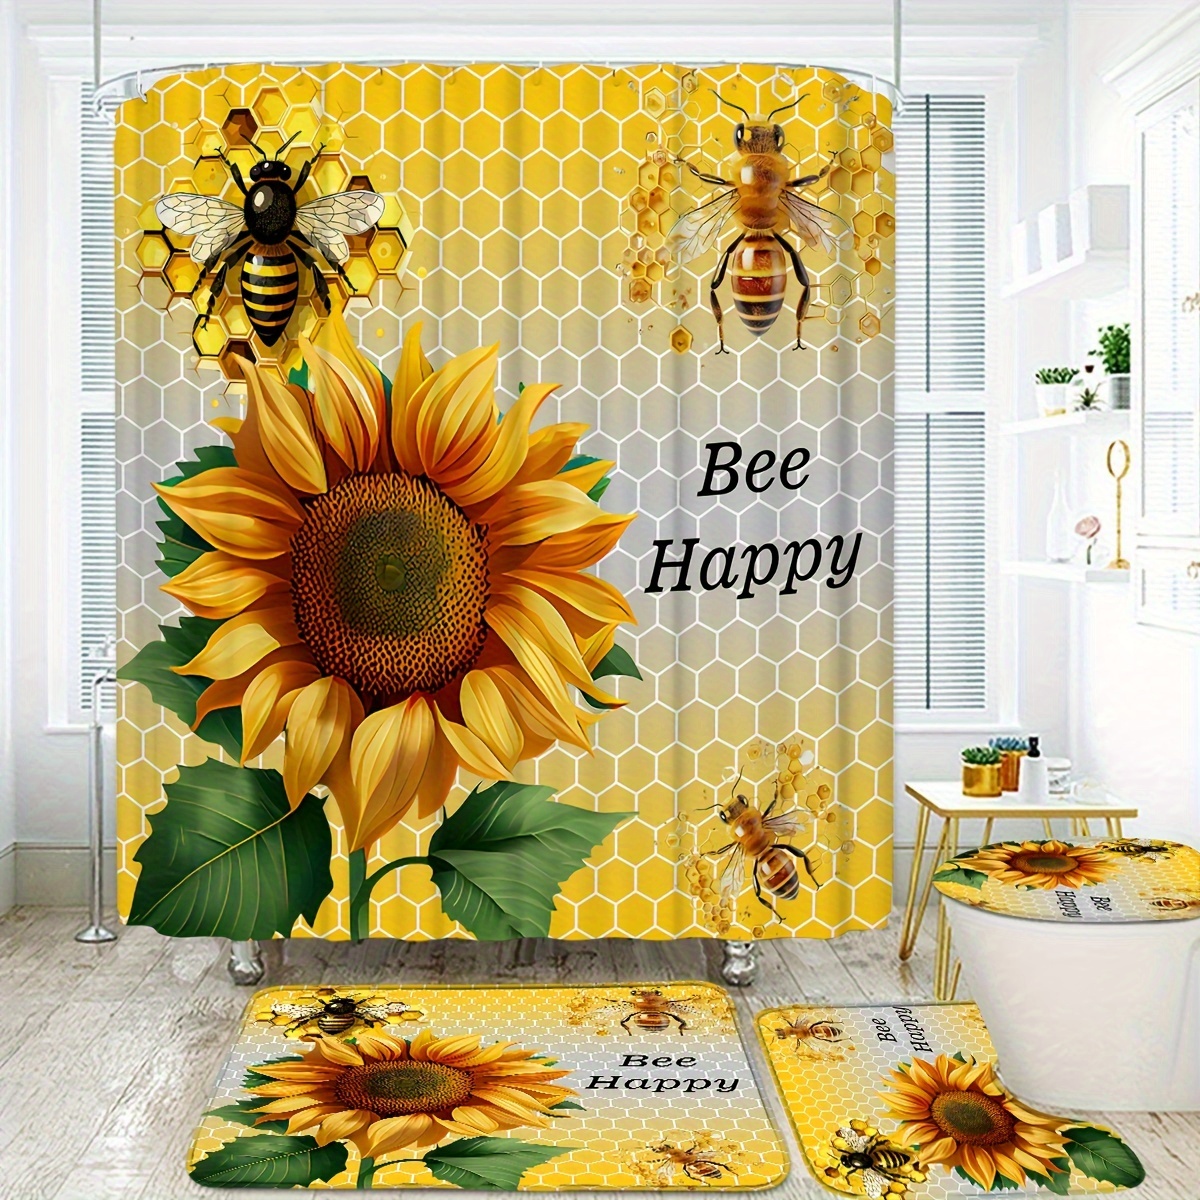 

4-piece Bee & Sunflower Shower Curtain Set - Waterproof Polyester, Includes Non-slip Bath Mat, Toilet Lid Cover, U-shaped Rug & Hooks - Charming Honeycomb Design For All Seasons